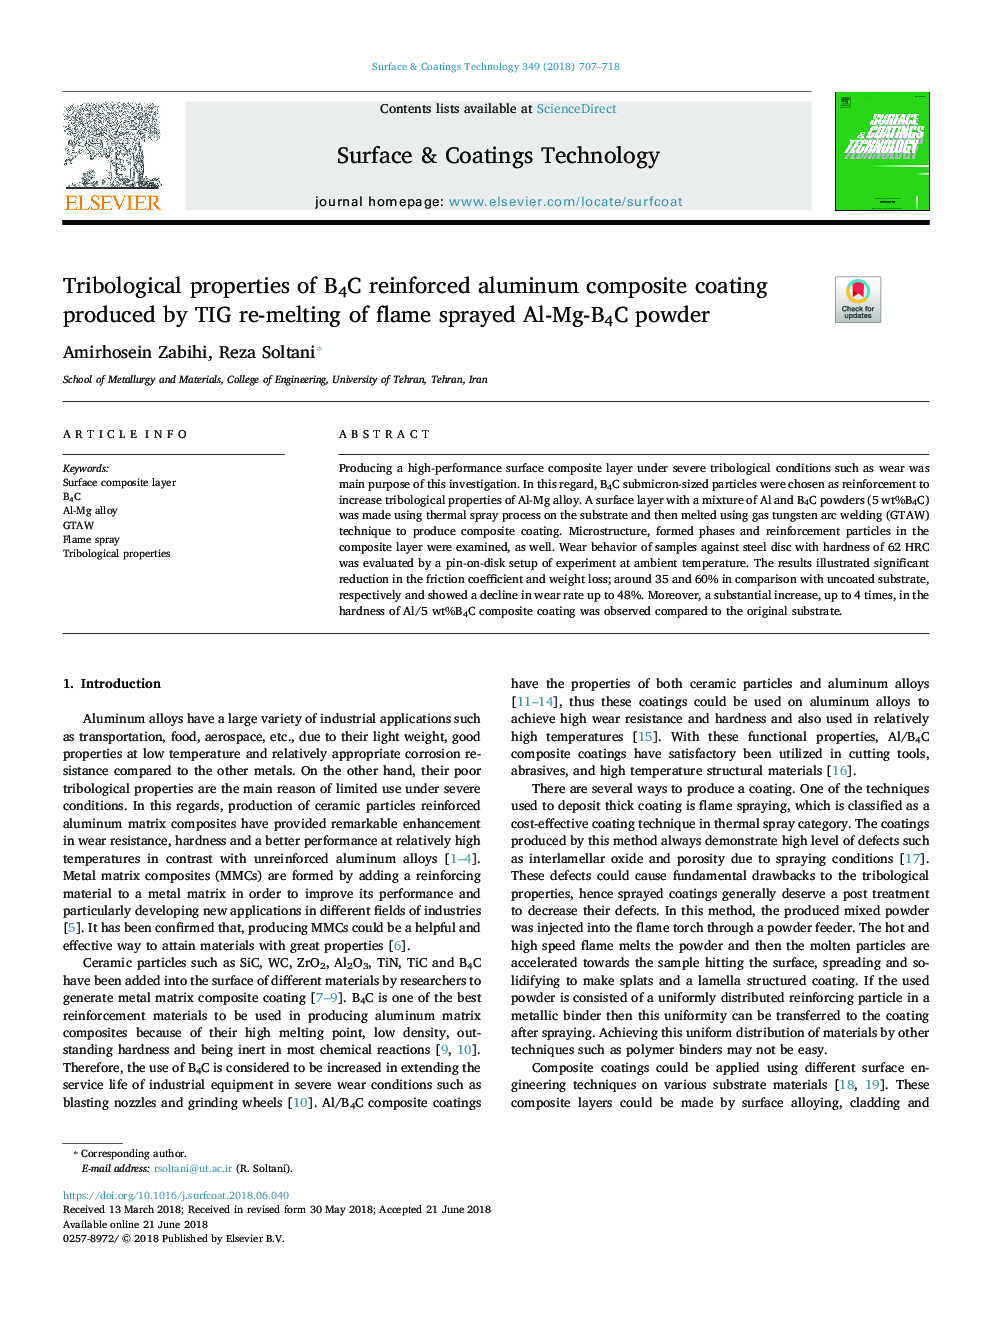 Tribological properties of B4C reinforced aluminum composite coating produced by TIG re-melting of flame sprayed Al-Mg-B4C powder